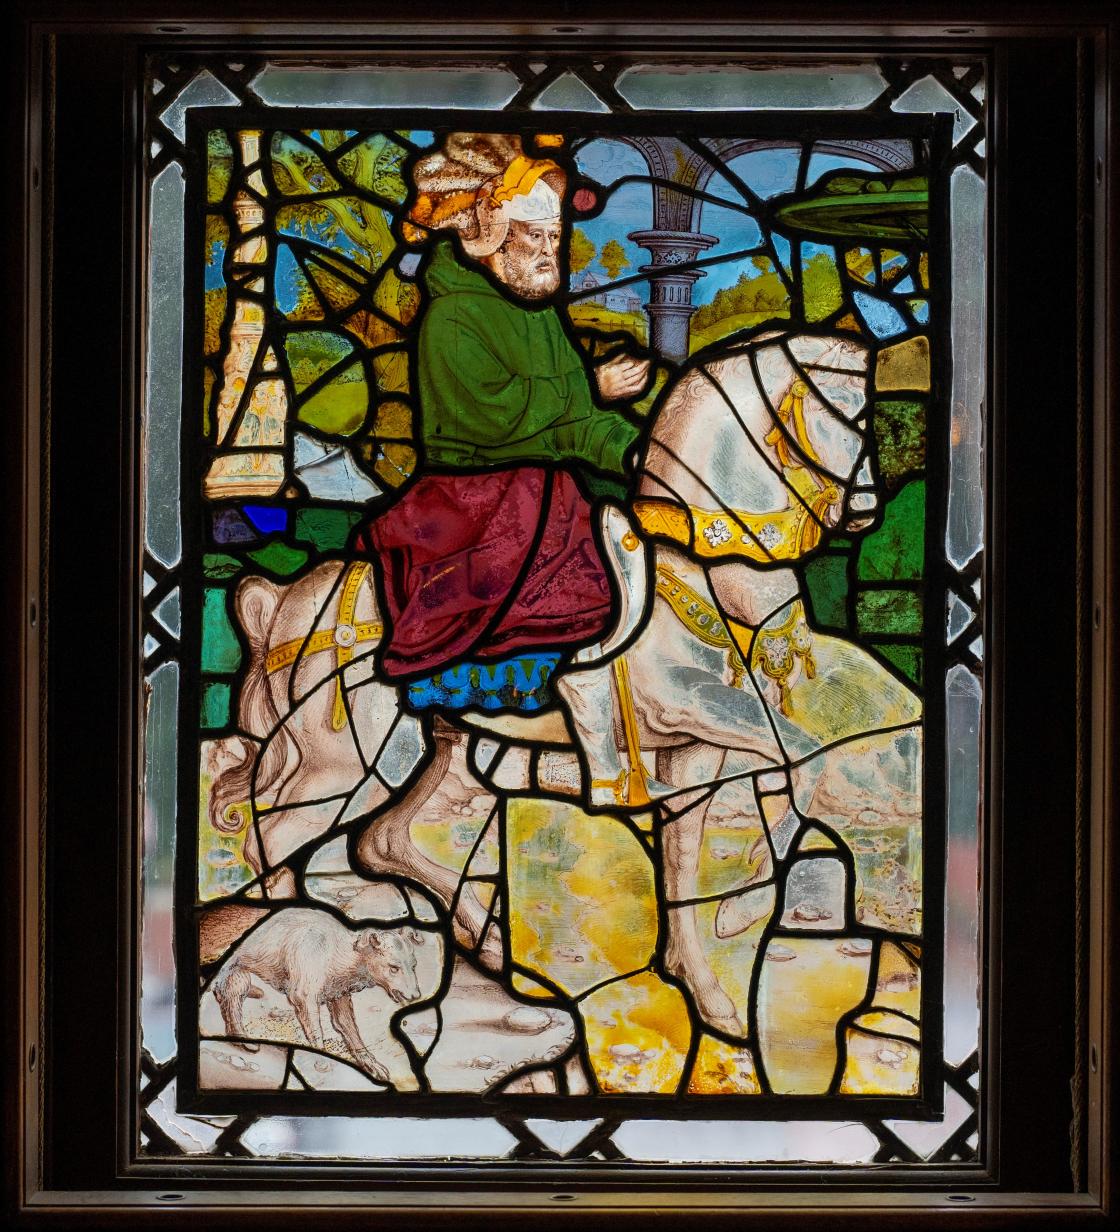 Photograph of a stained-glass window featuring a man riding a horse